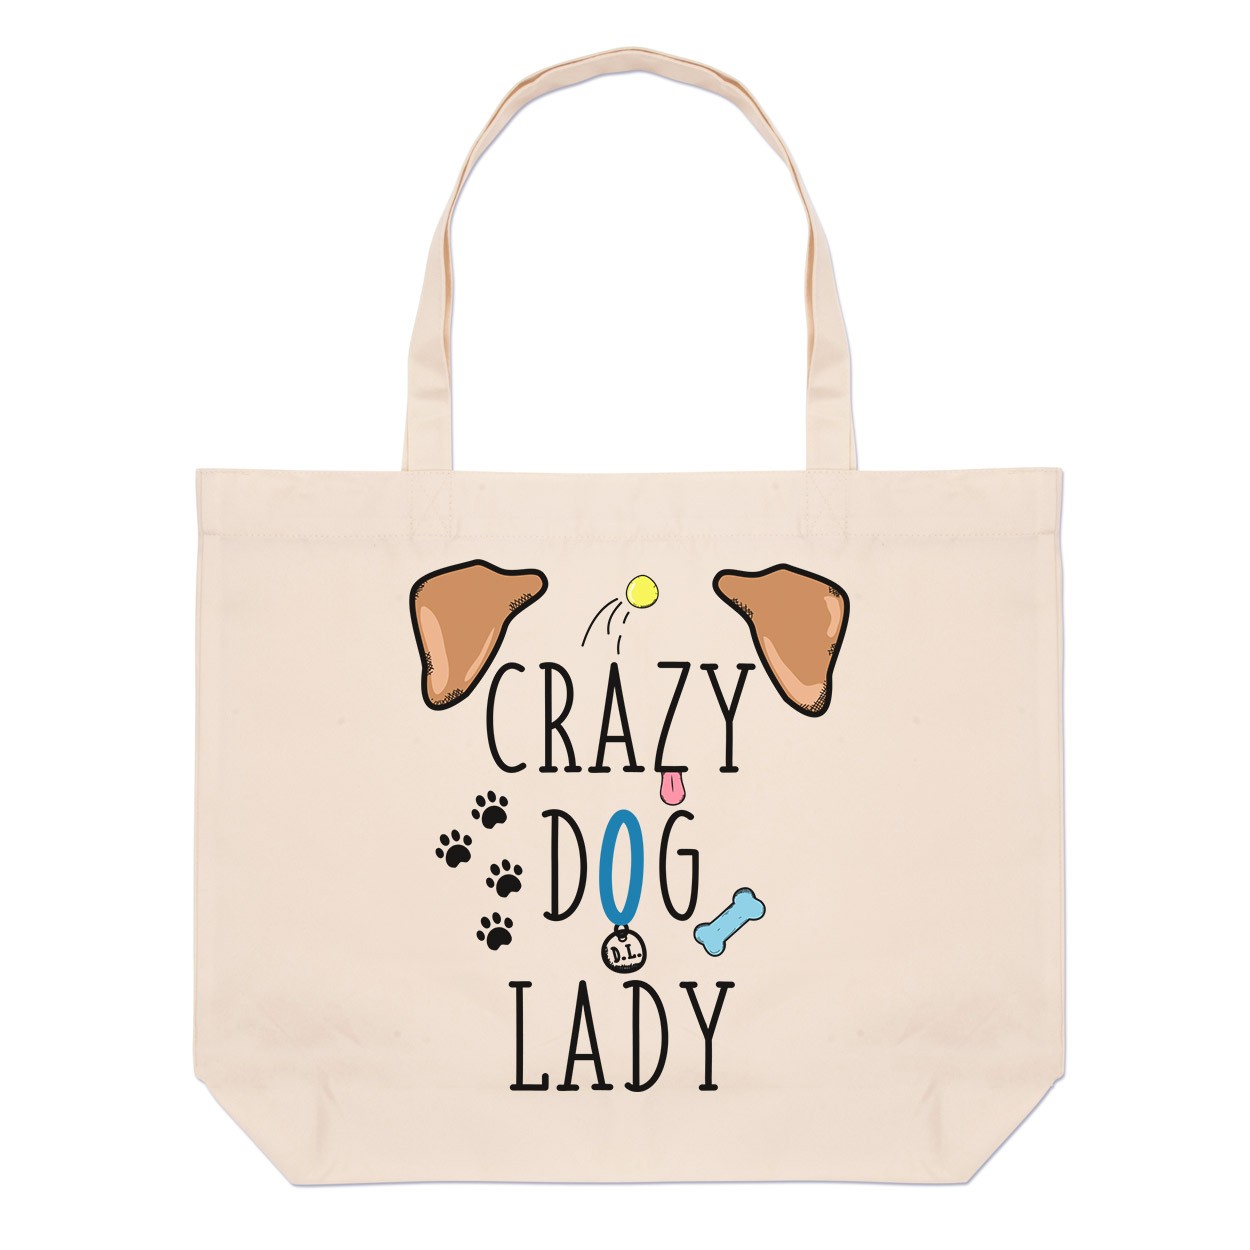 Crazy Dog Lady Brown Ears Large Beach Tote Bag